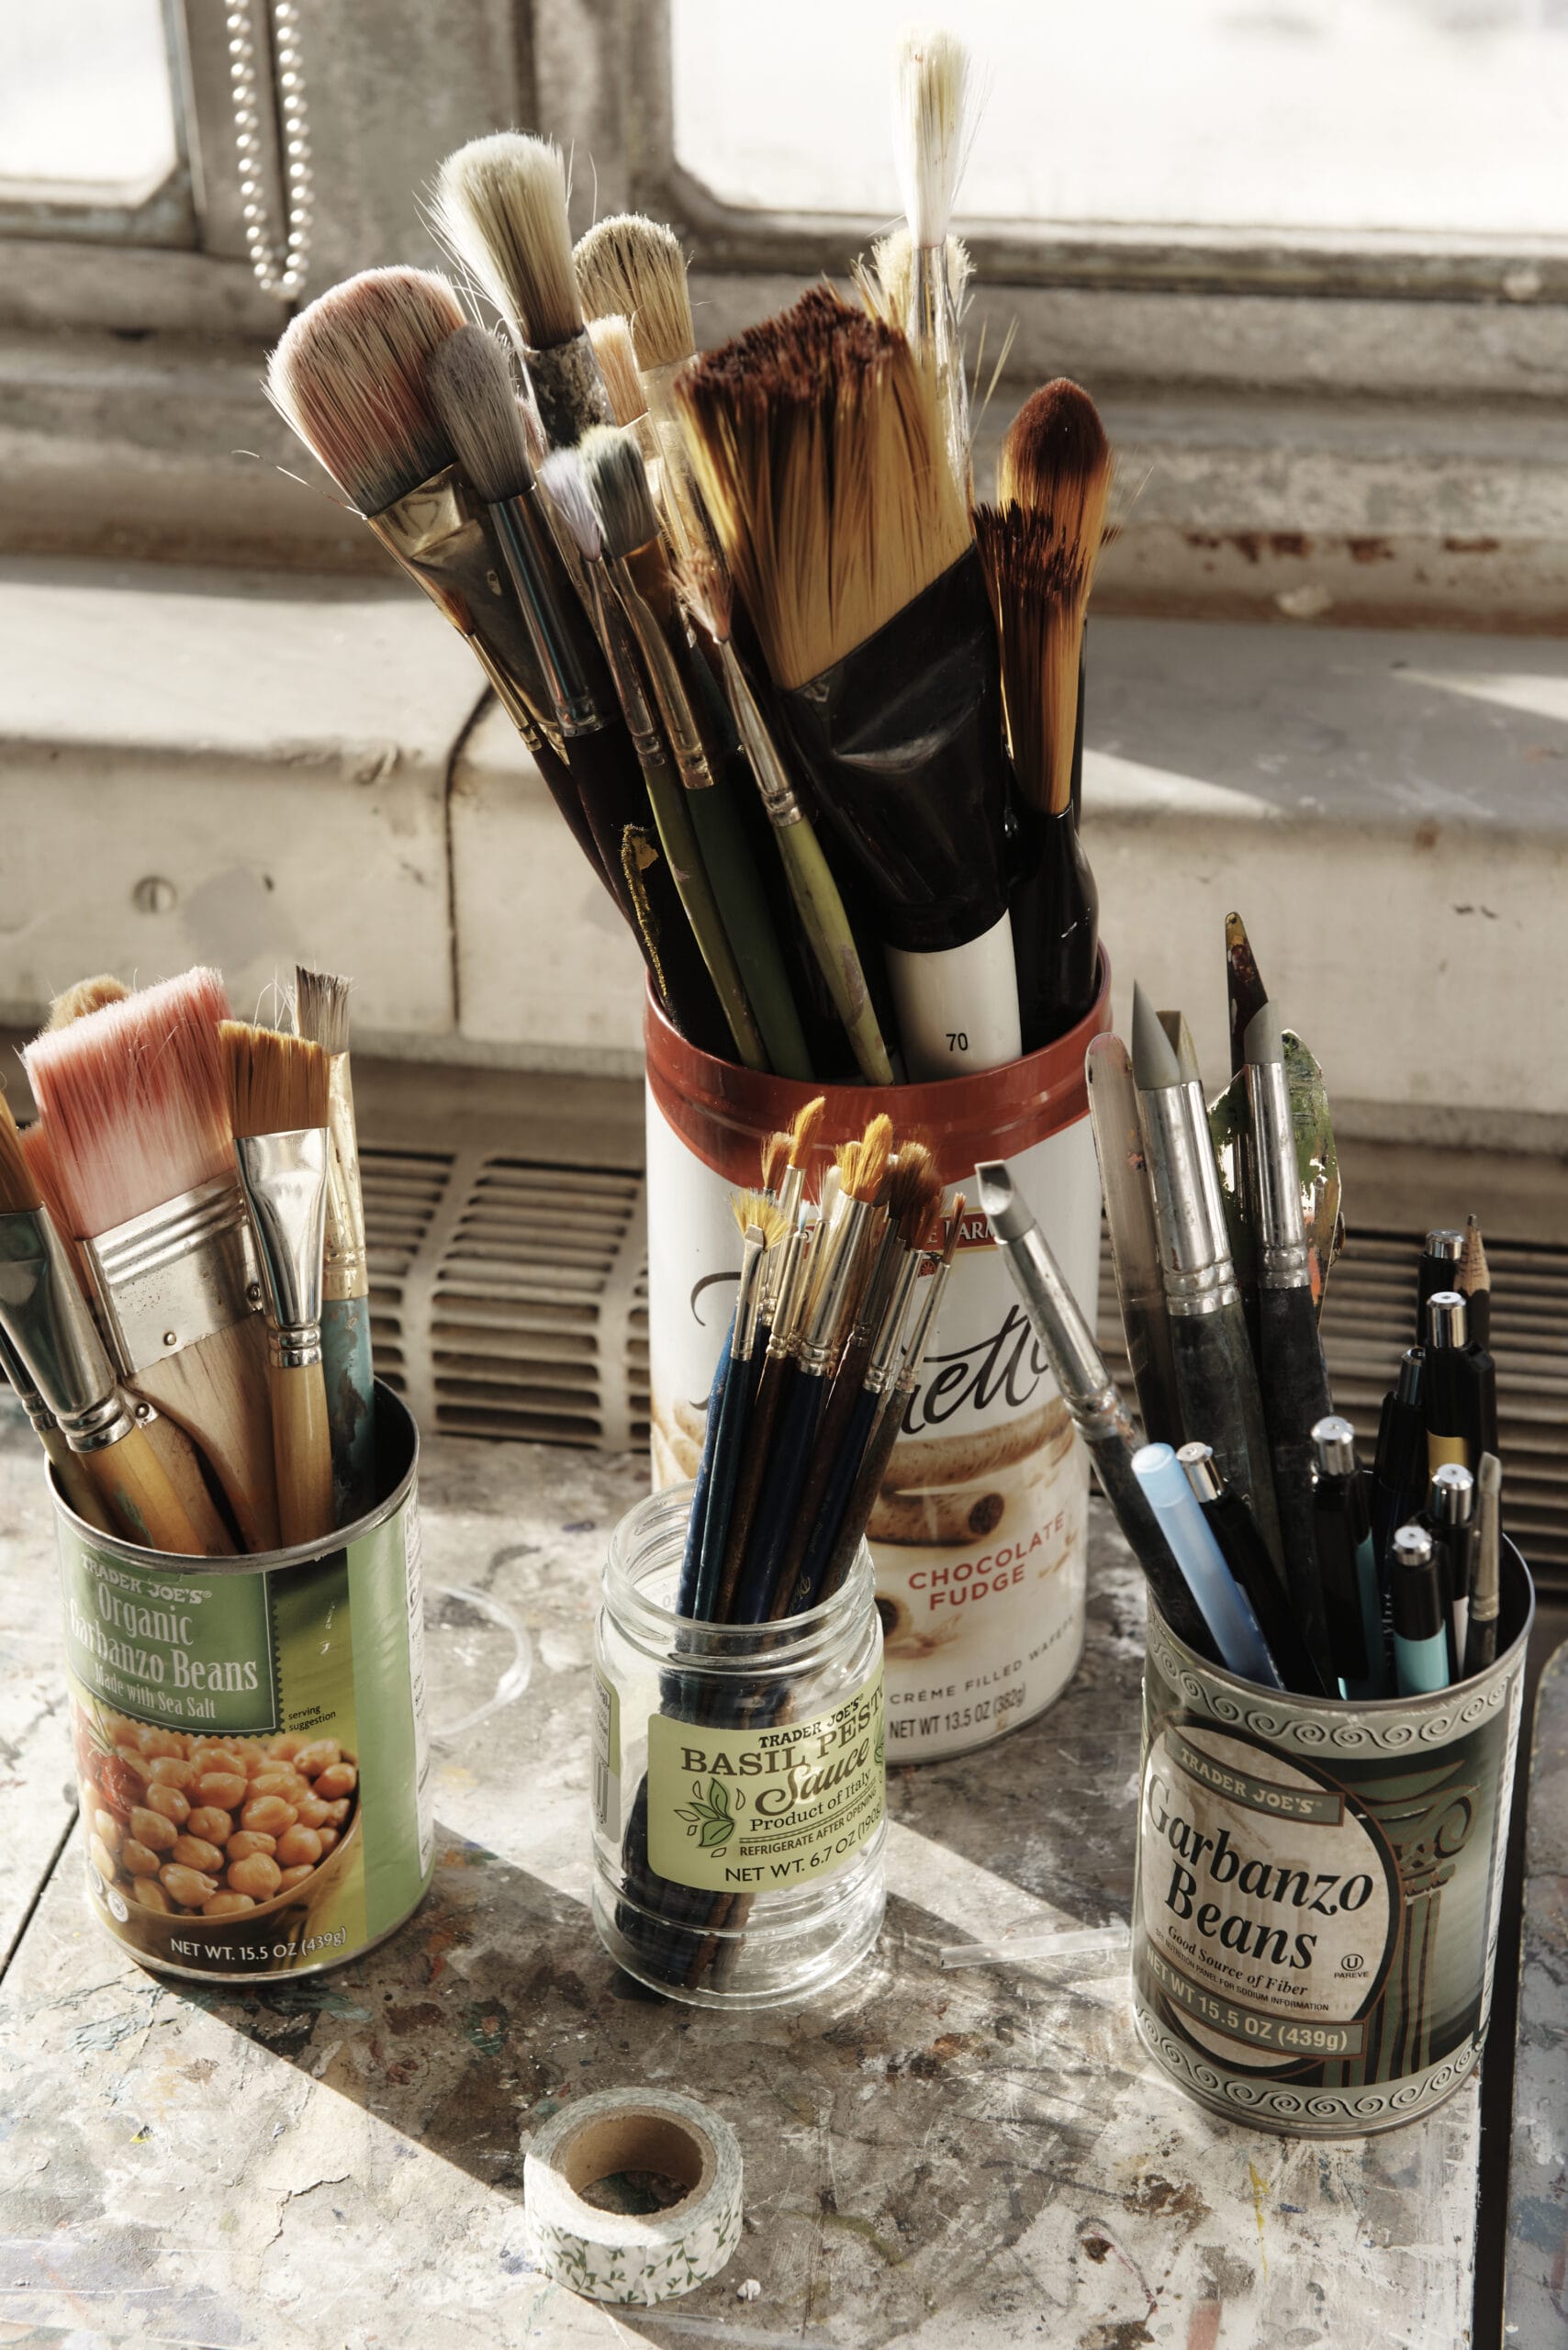 Cans of paint brushes on a table by the window.